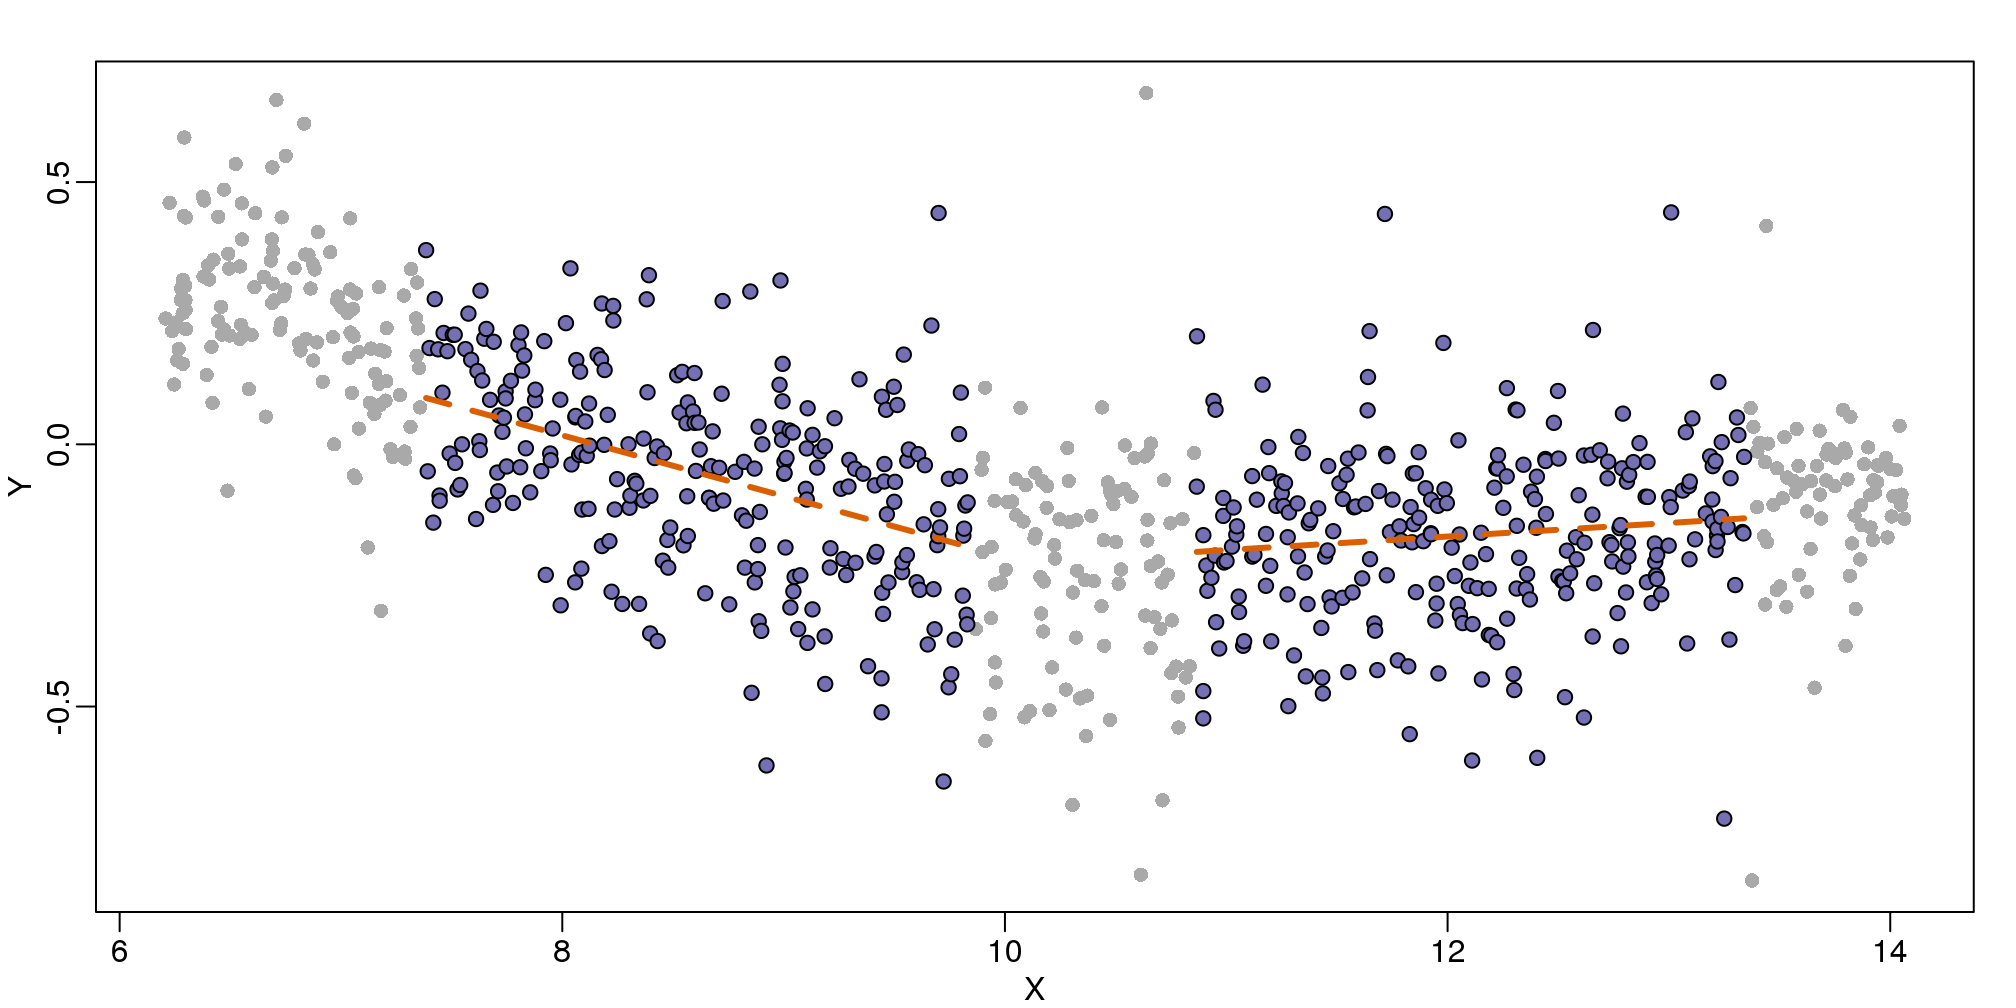 MA-plot comparing gene expression from two arrays with bin local regression fit shown for two points.